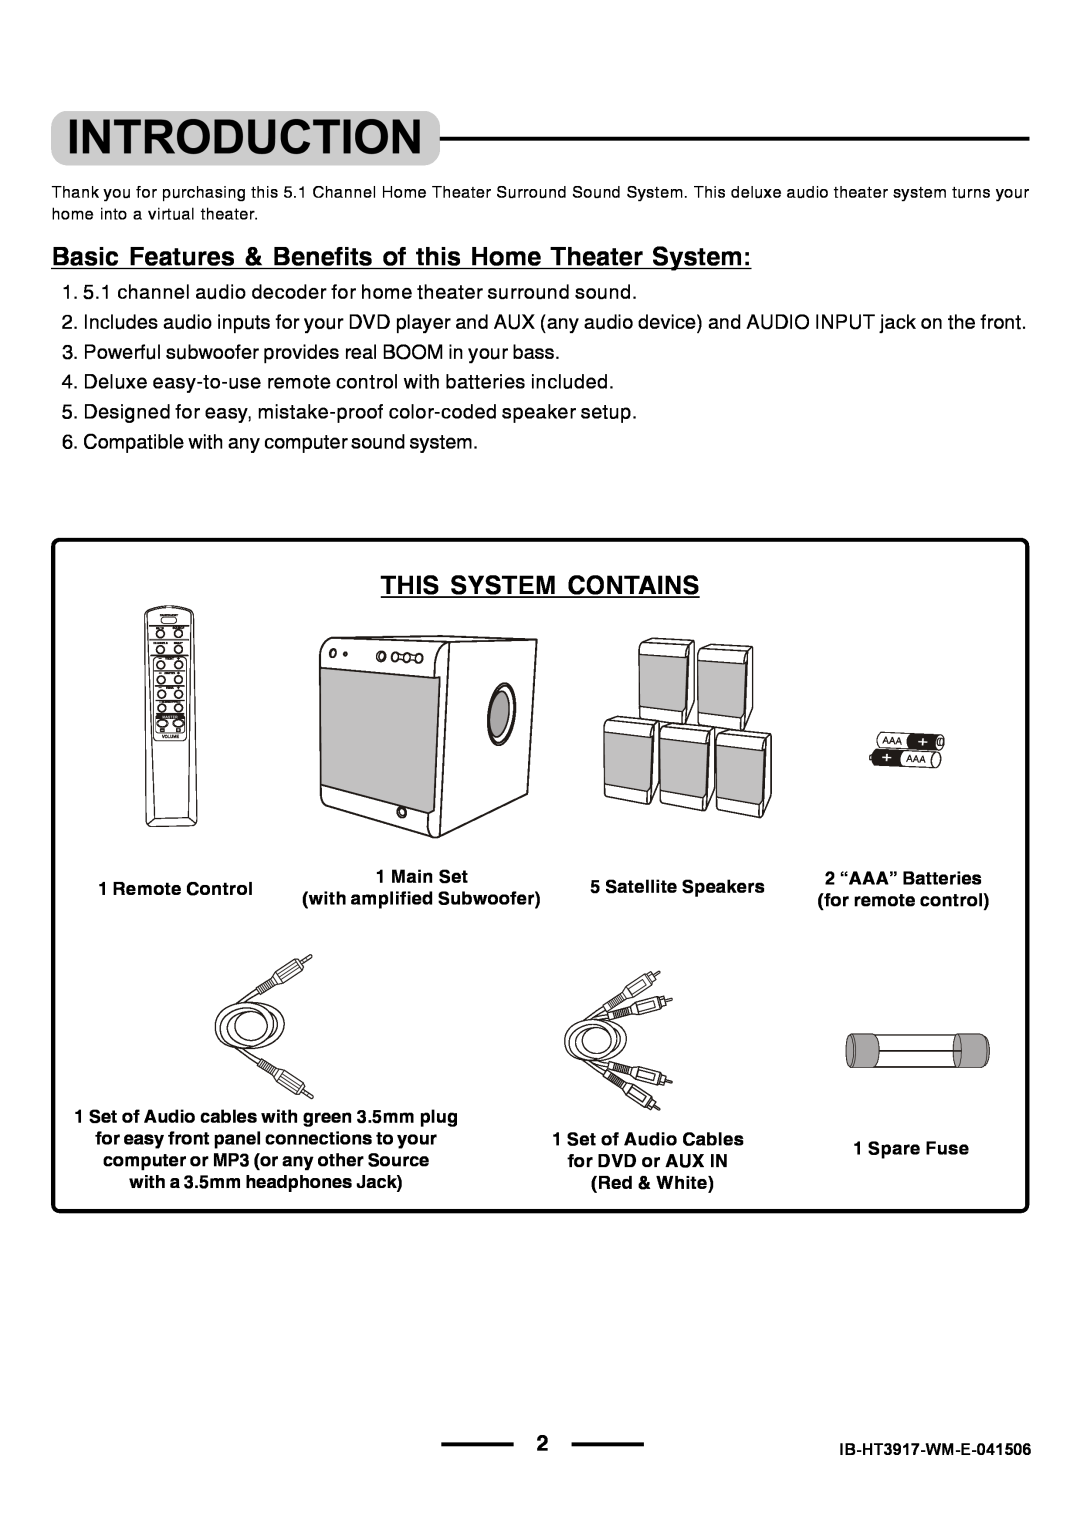 Lenoxx Electronics HT3917 manual This System Contains 